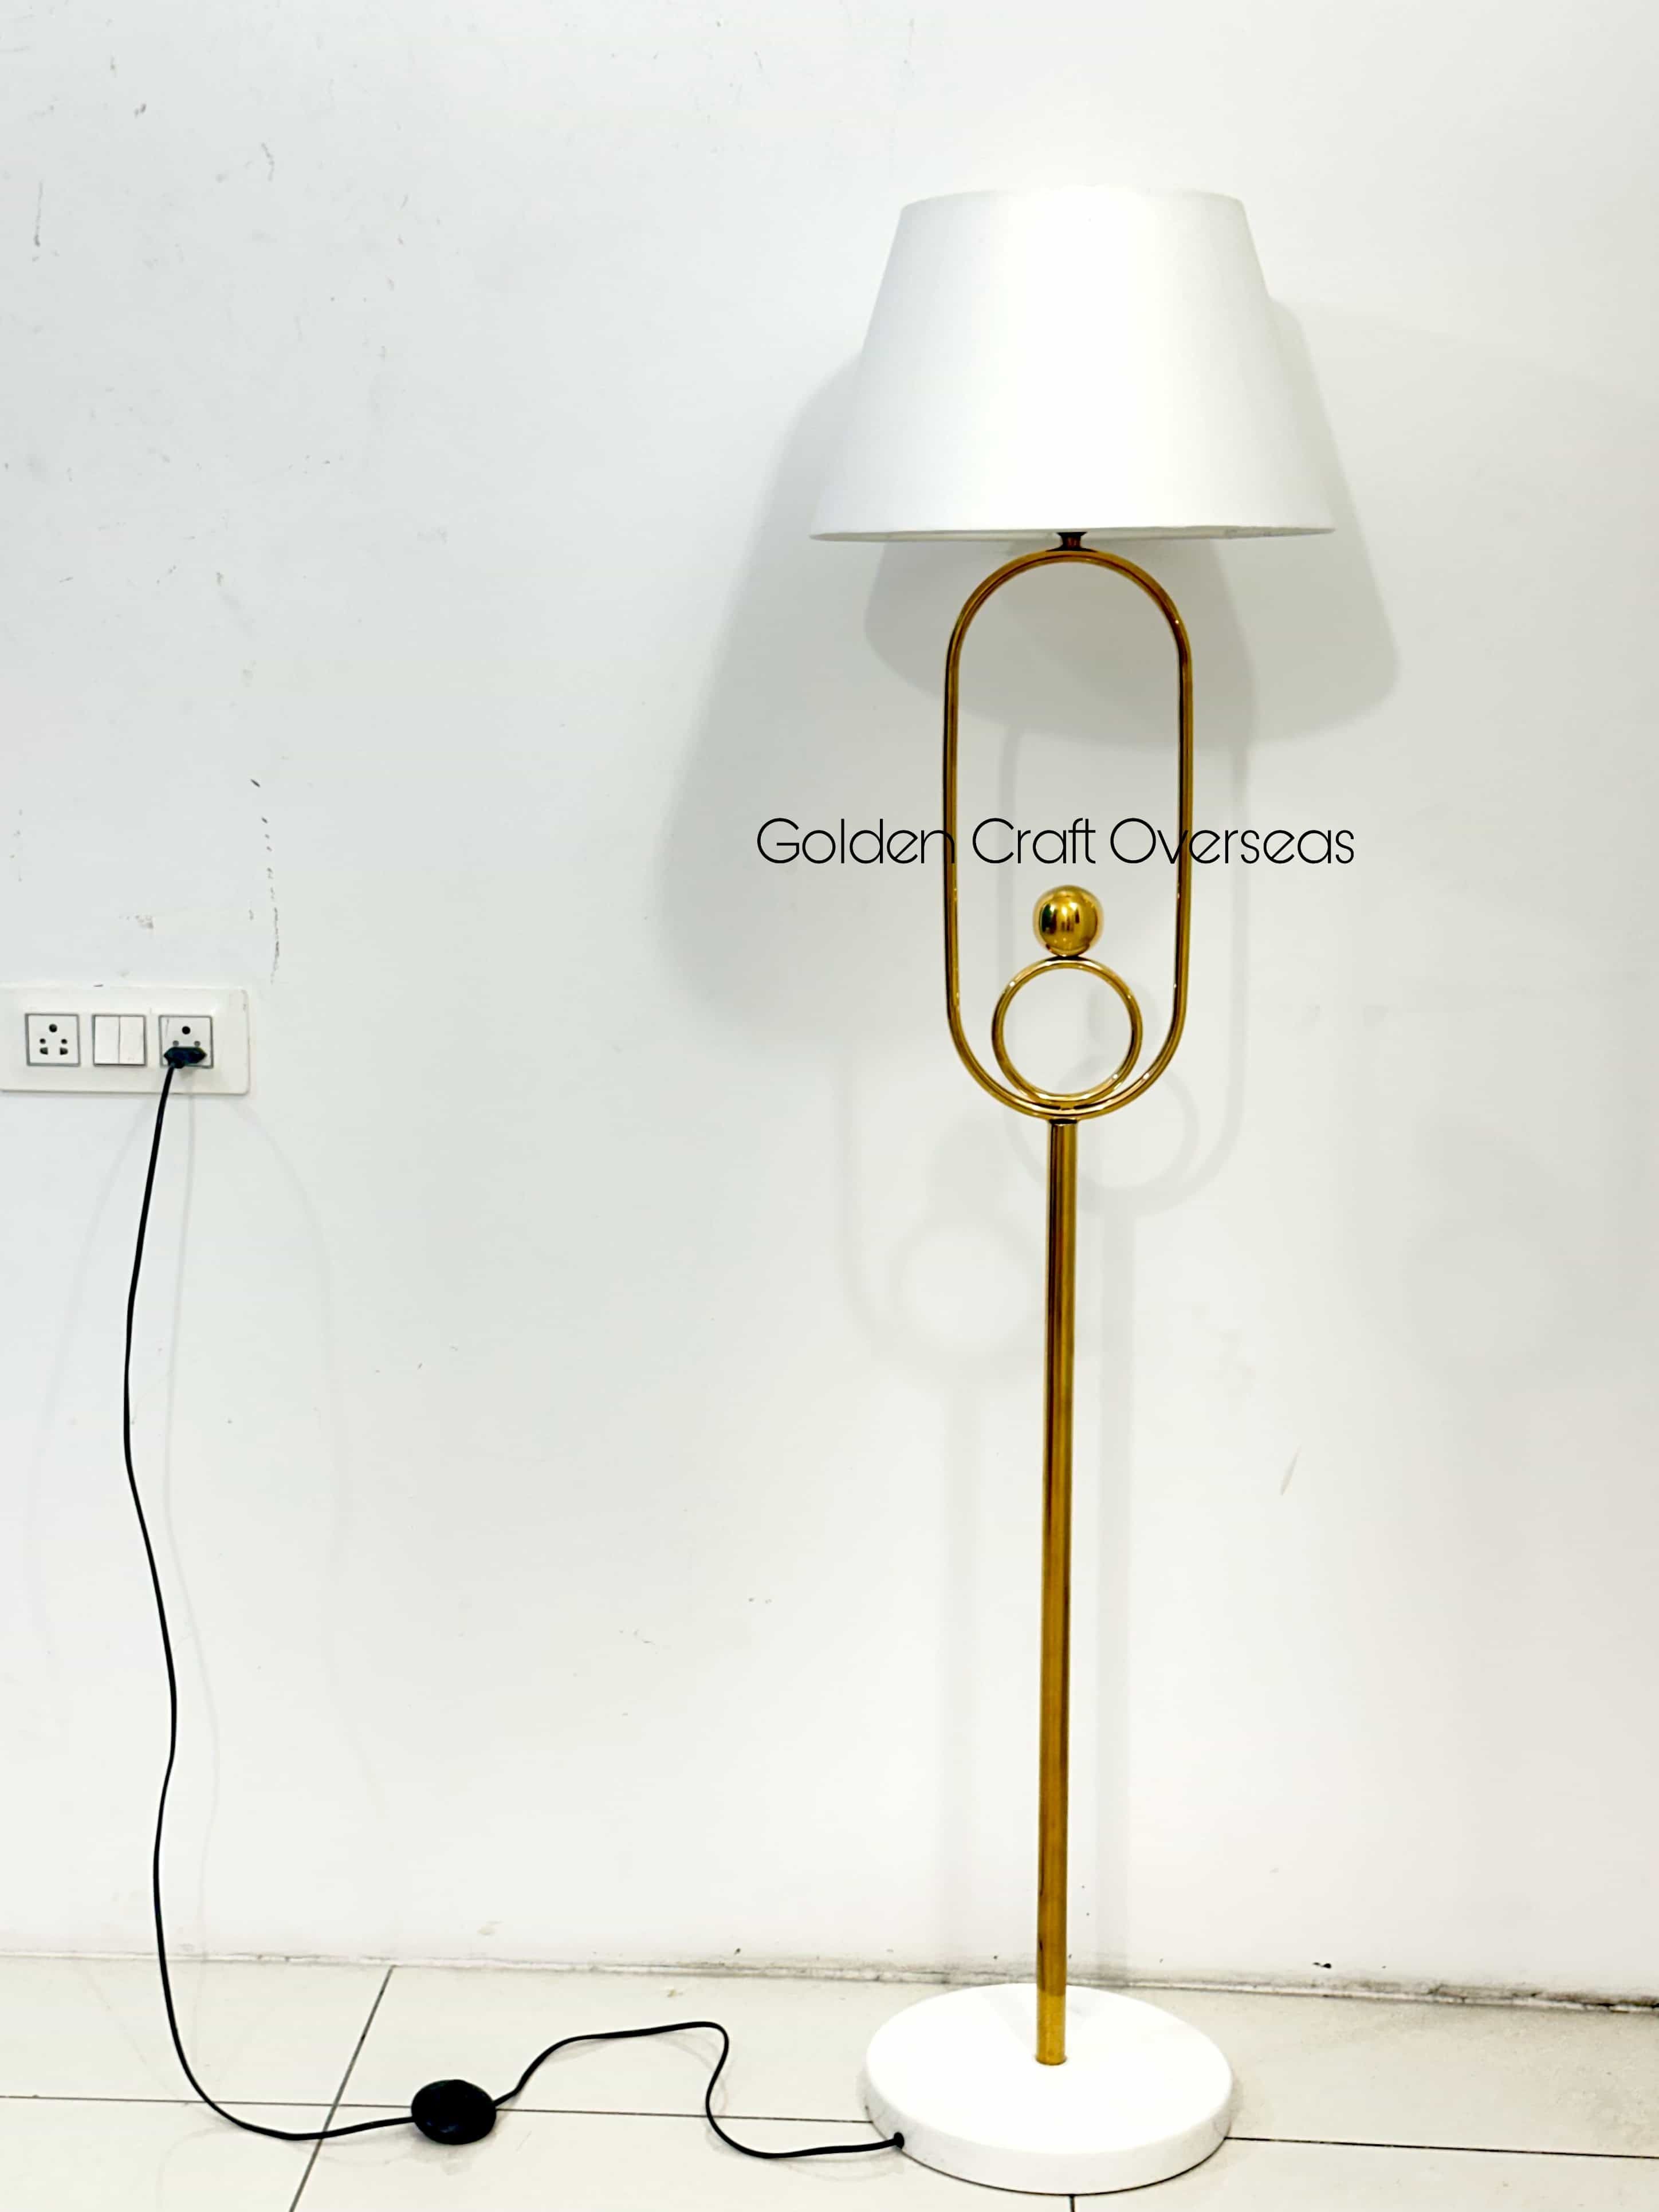 Stainless Steel Floor Lamp with PVD Coated finish and Fabric Shade customised